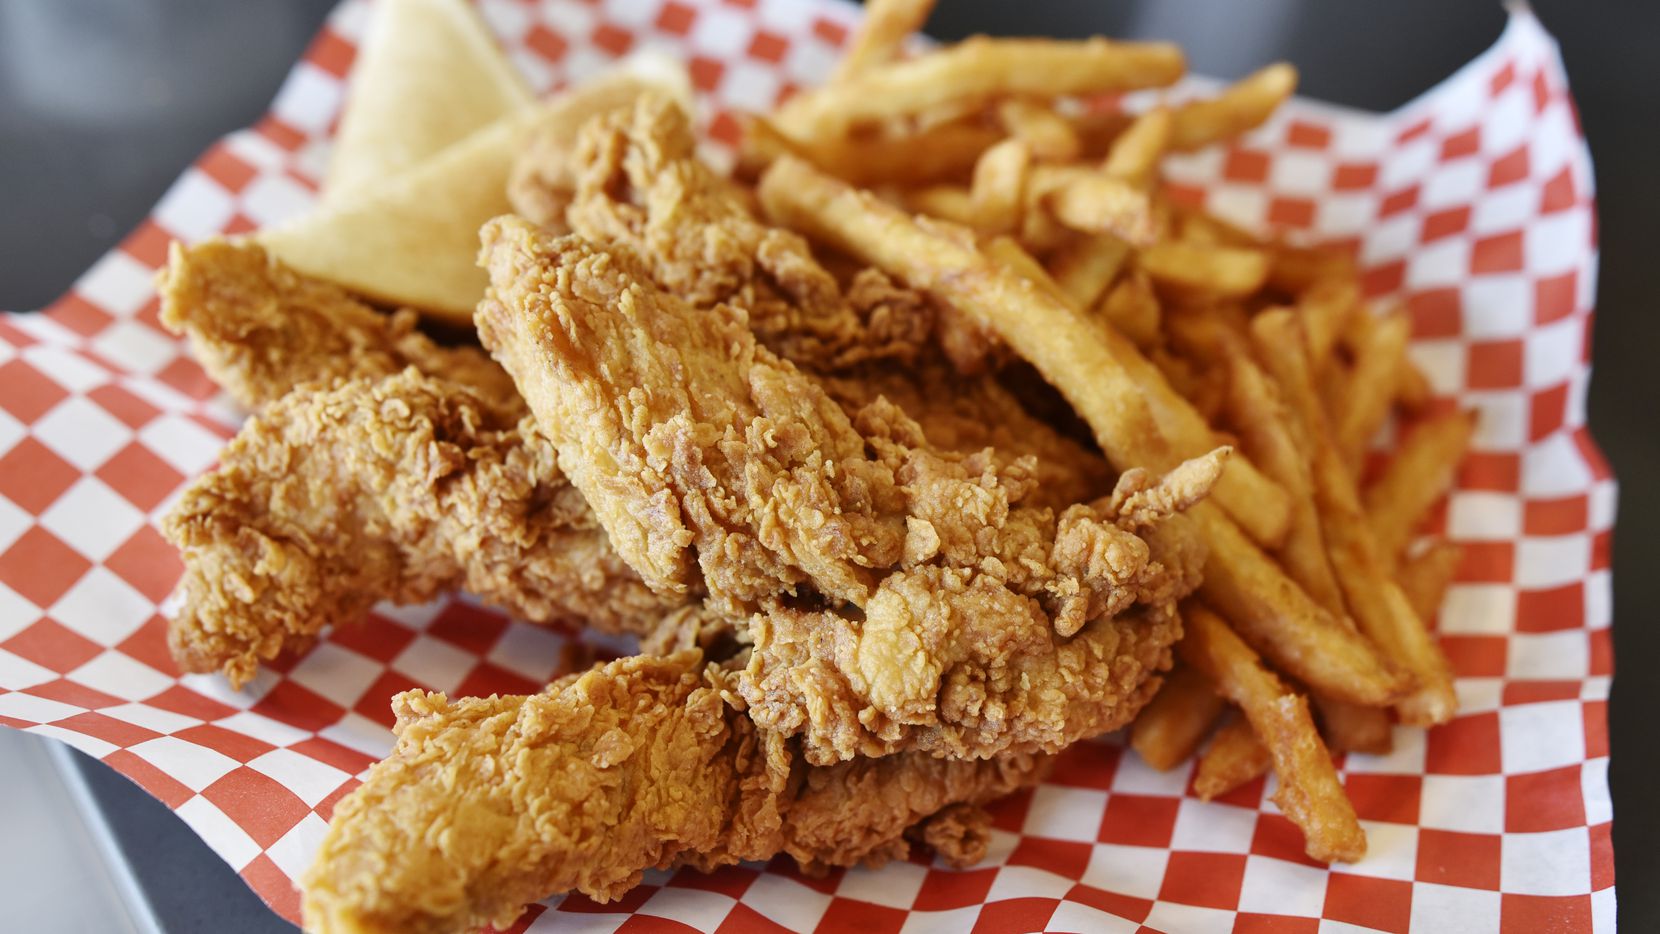 An order of chicken tenders, fries and toast from Mike's Chicken on Maple Avenue in Dallas....